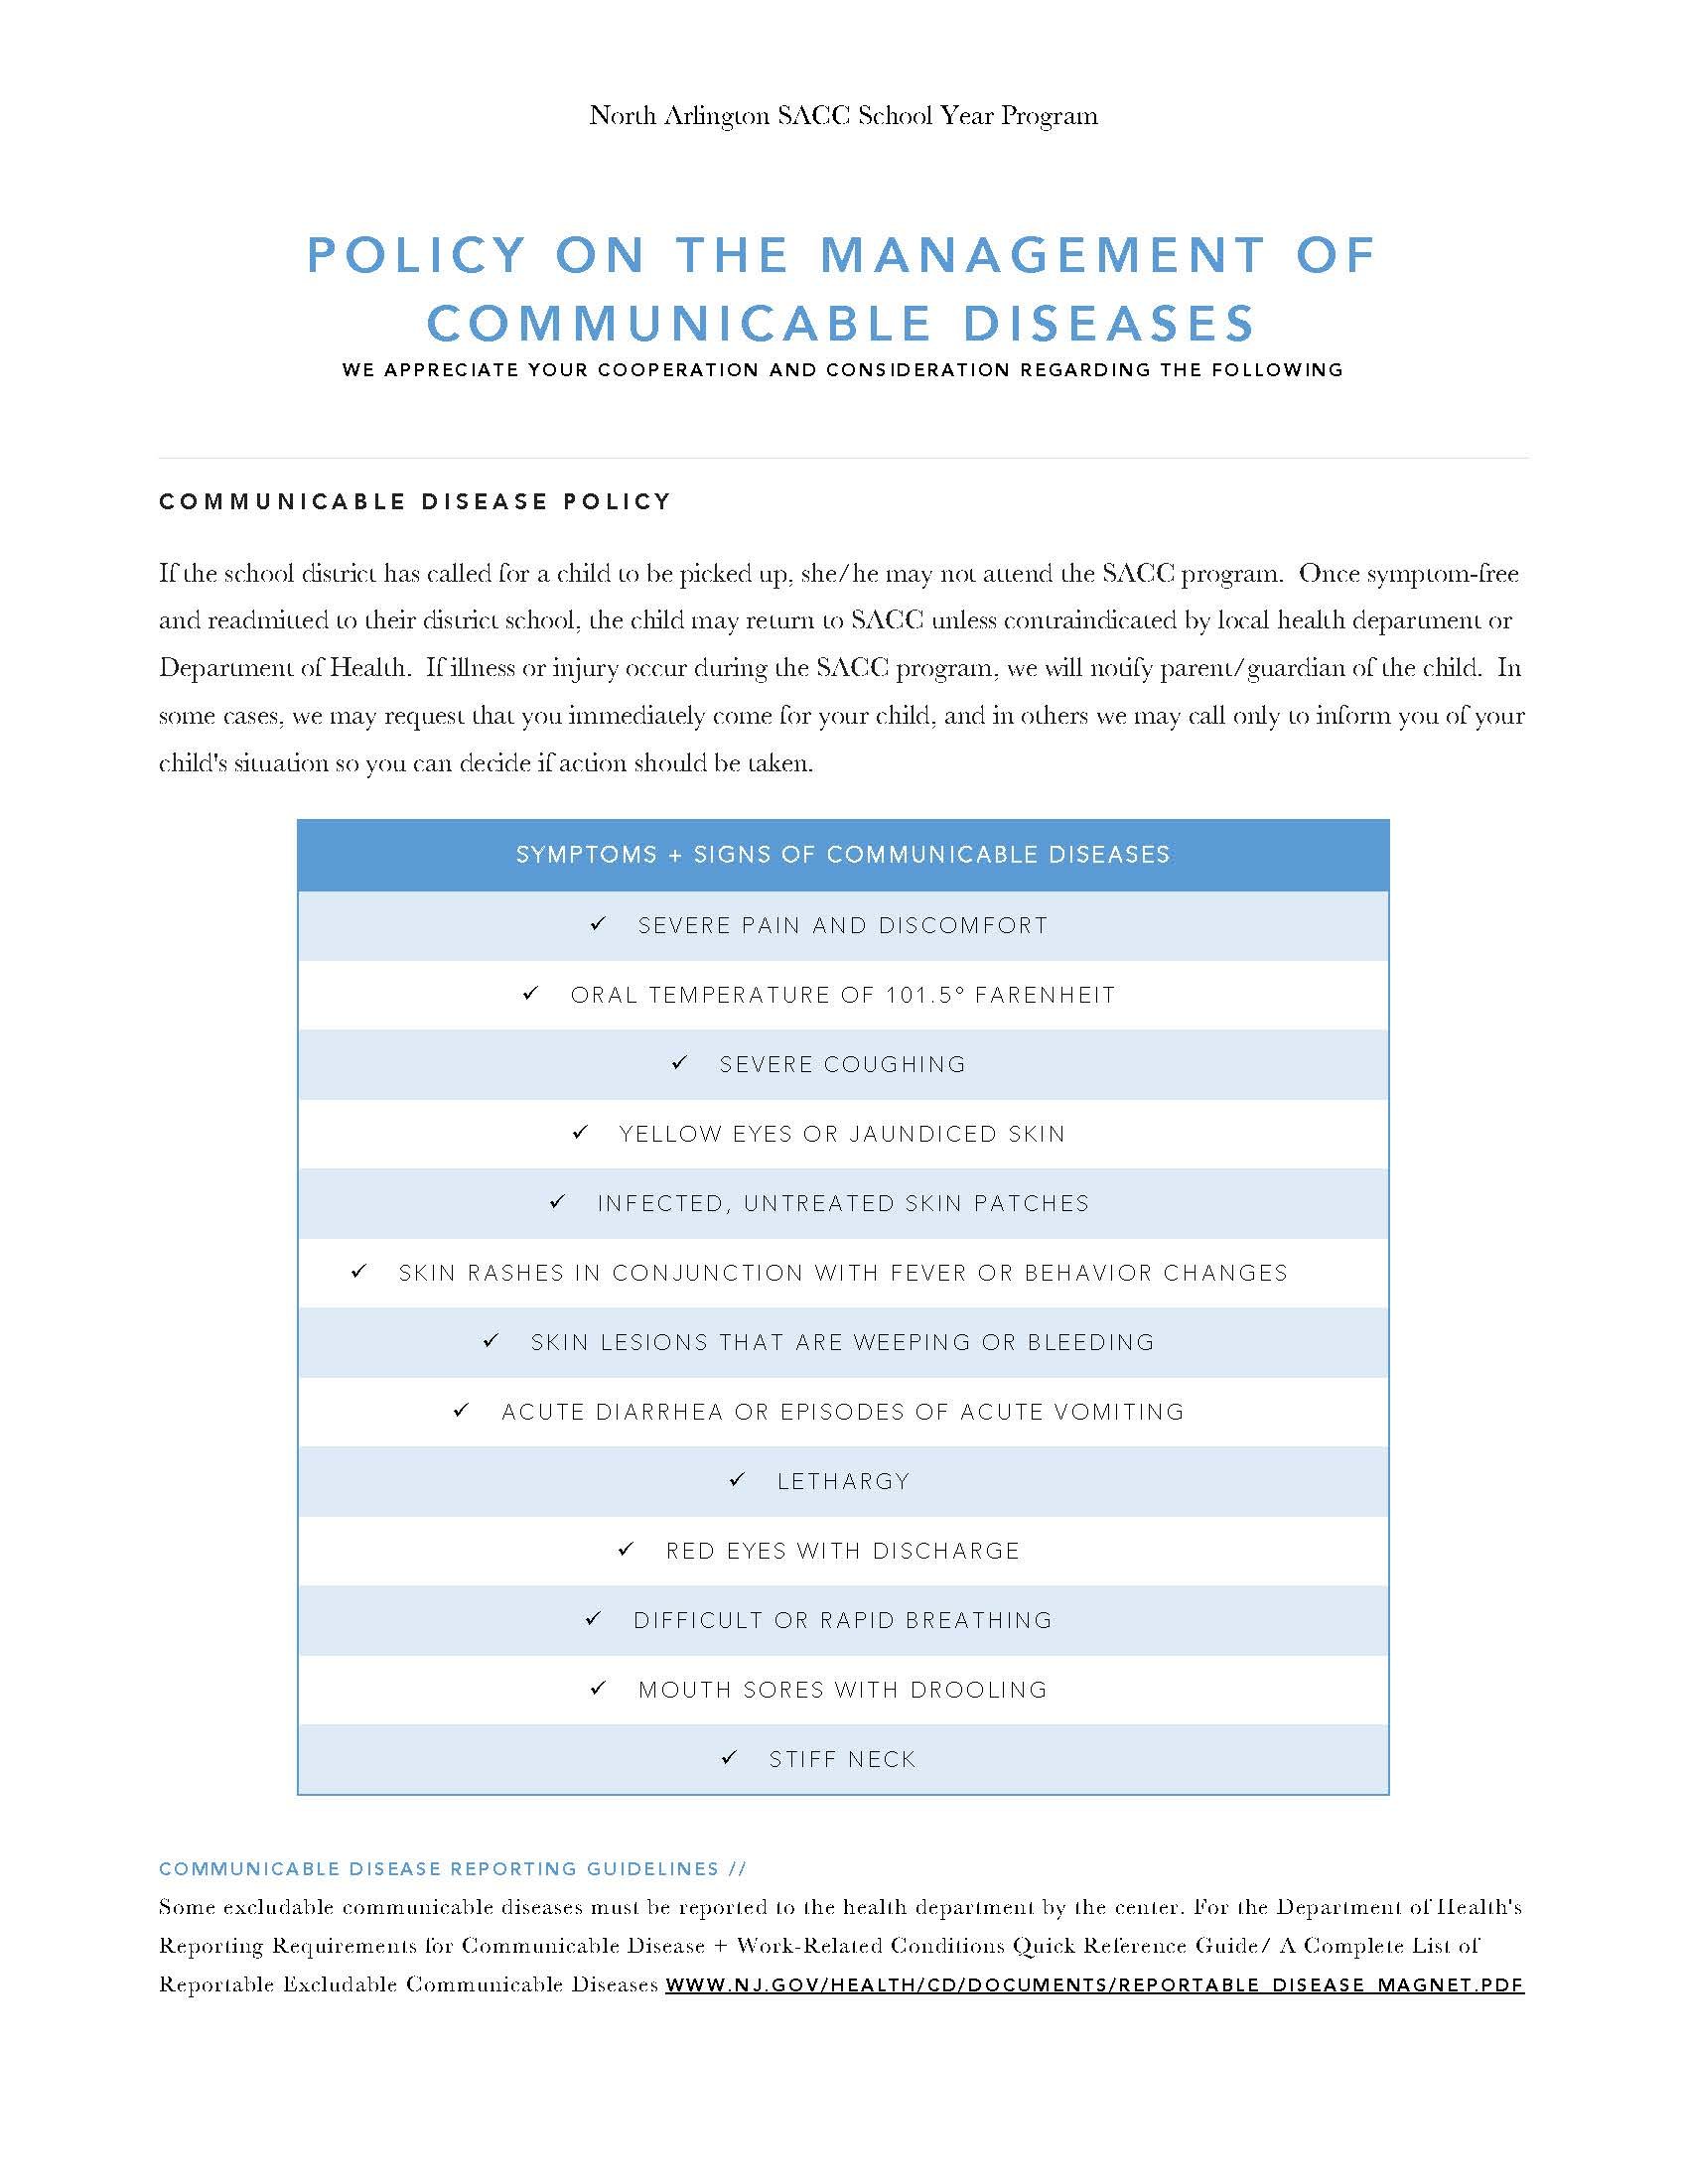 Policy on the Management of Communicable Diseases